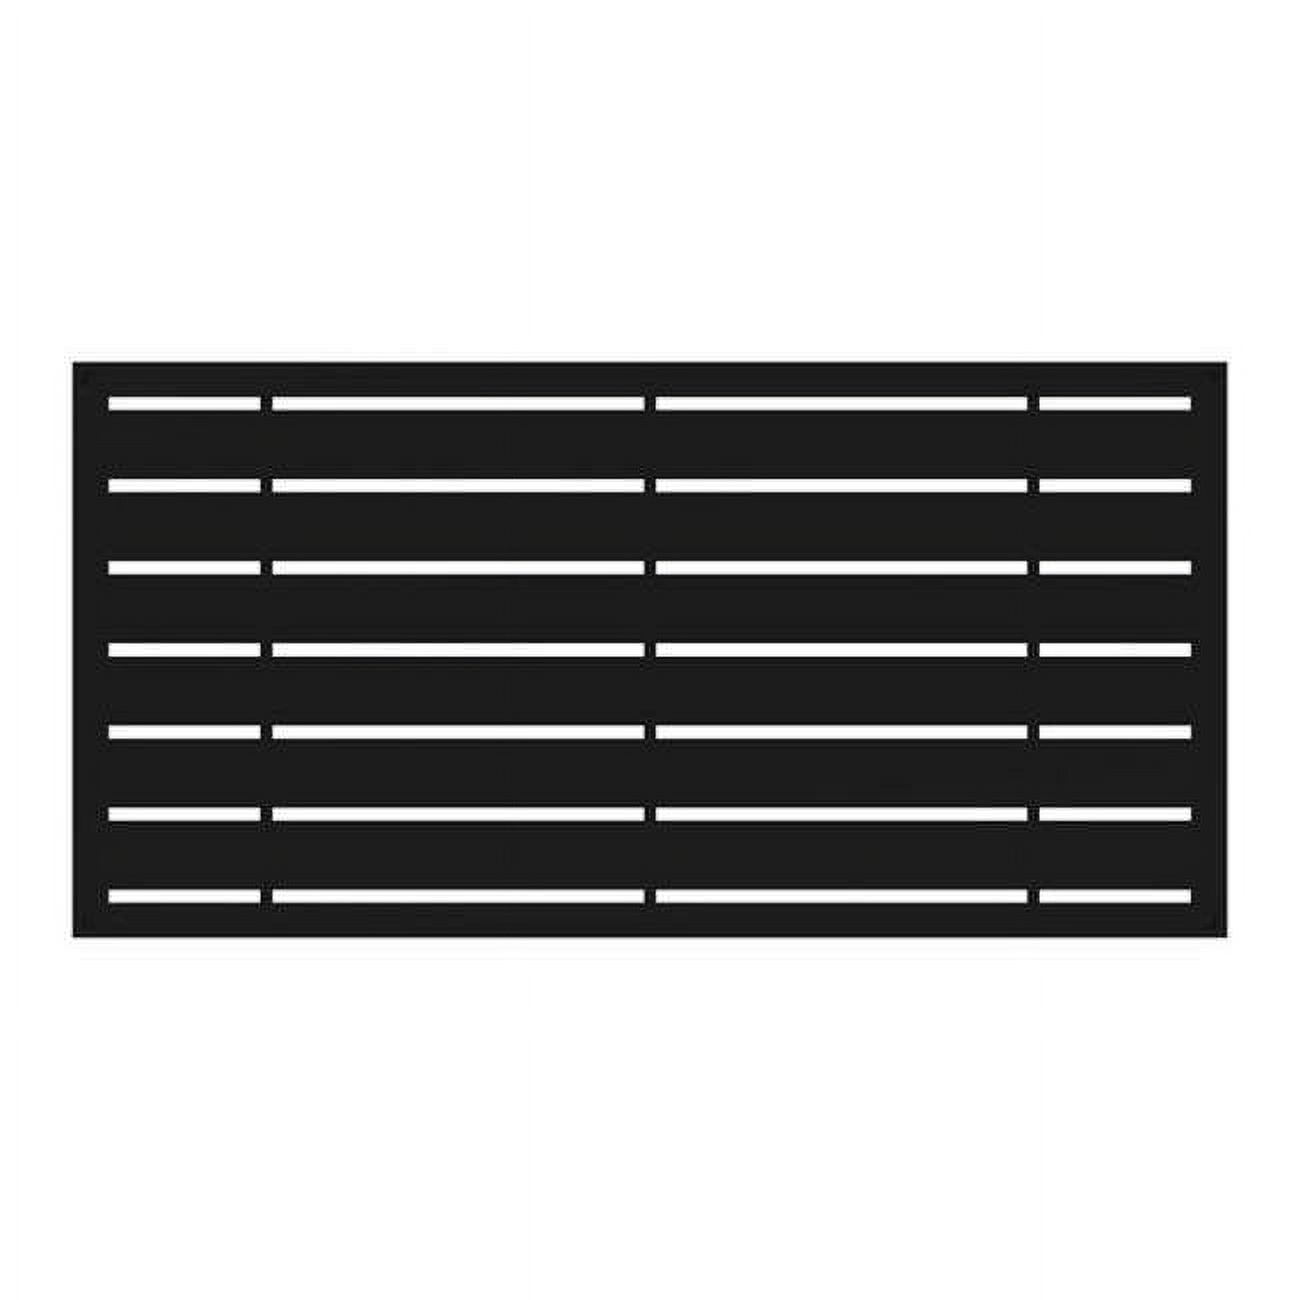 Picture of Barrette Outdoor Living 5018900 2 x 4 ft. Xpanse Boardwalk Polymer Screen Panel, Black